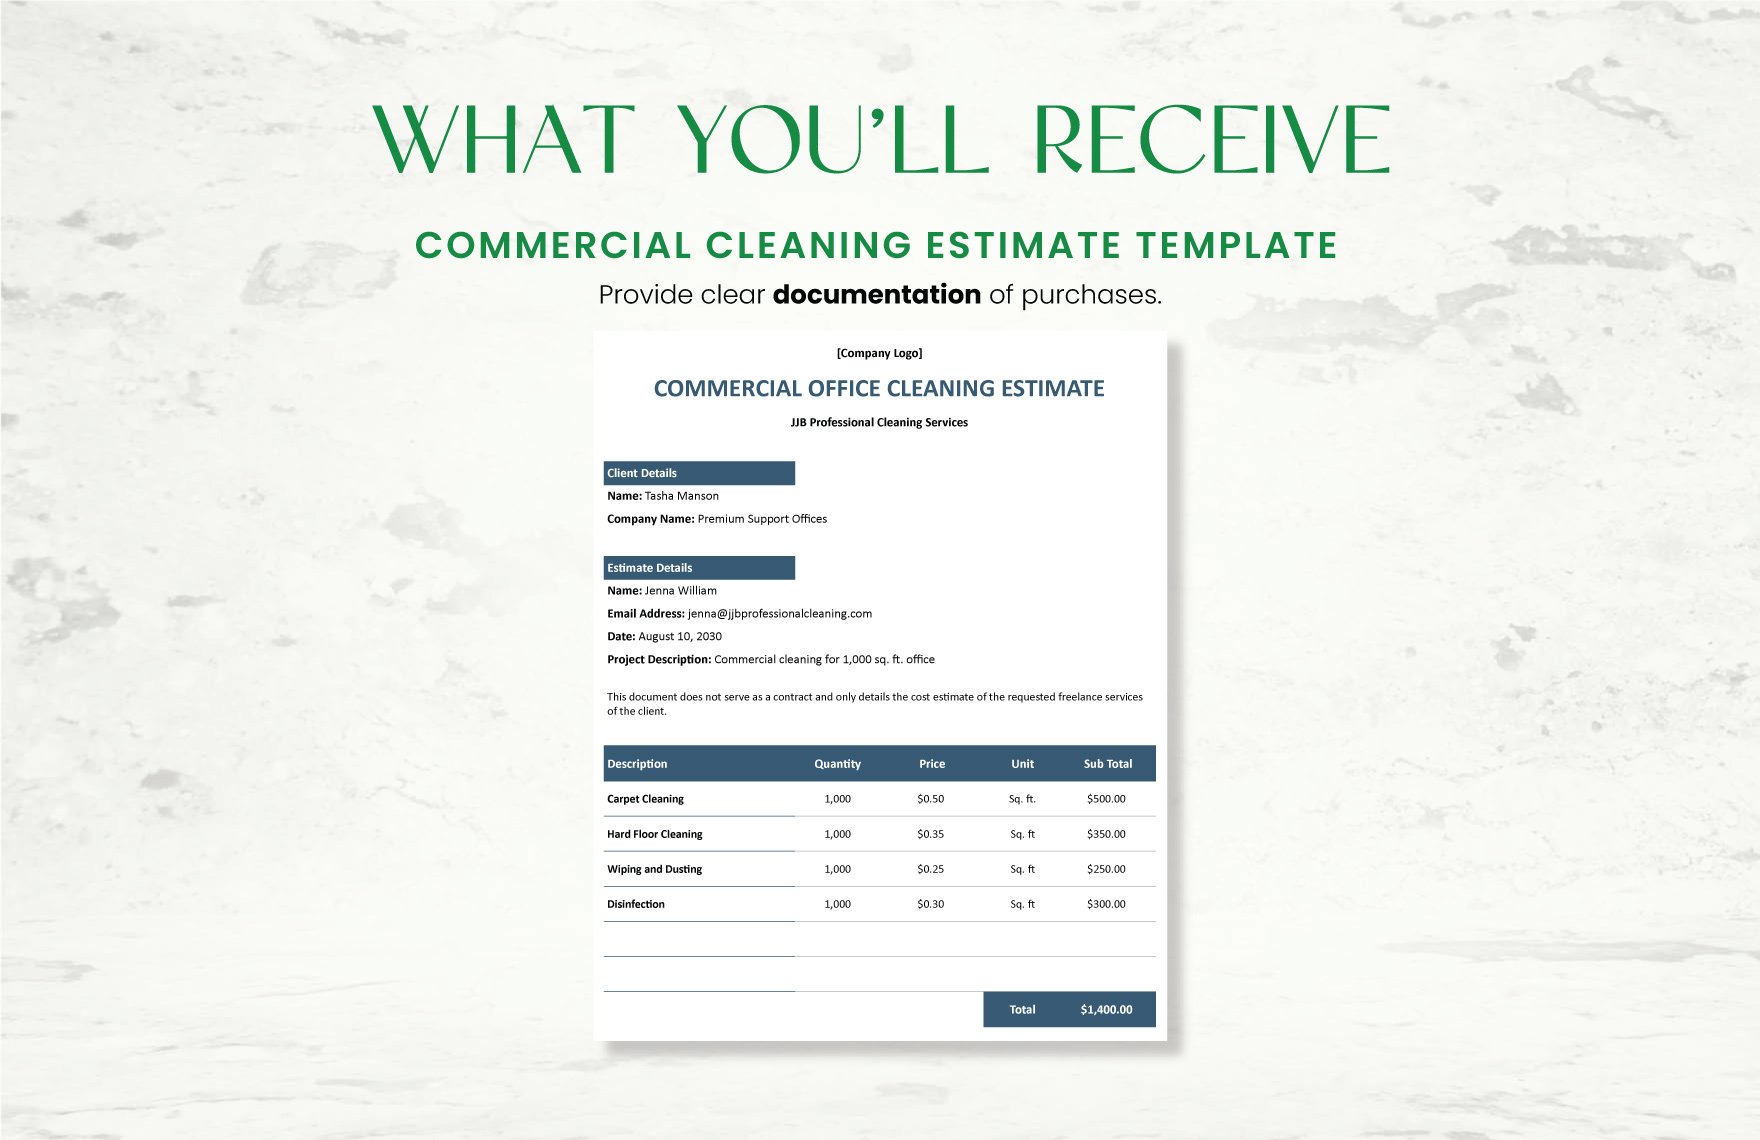 Commercial Cleaning Estimate Template